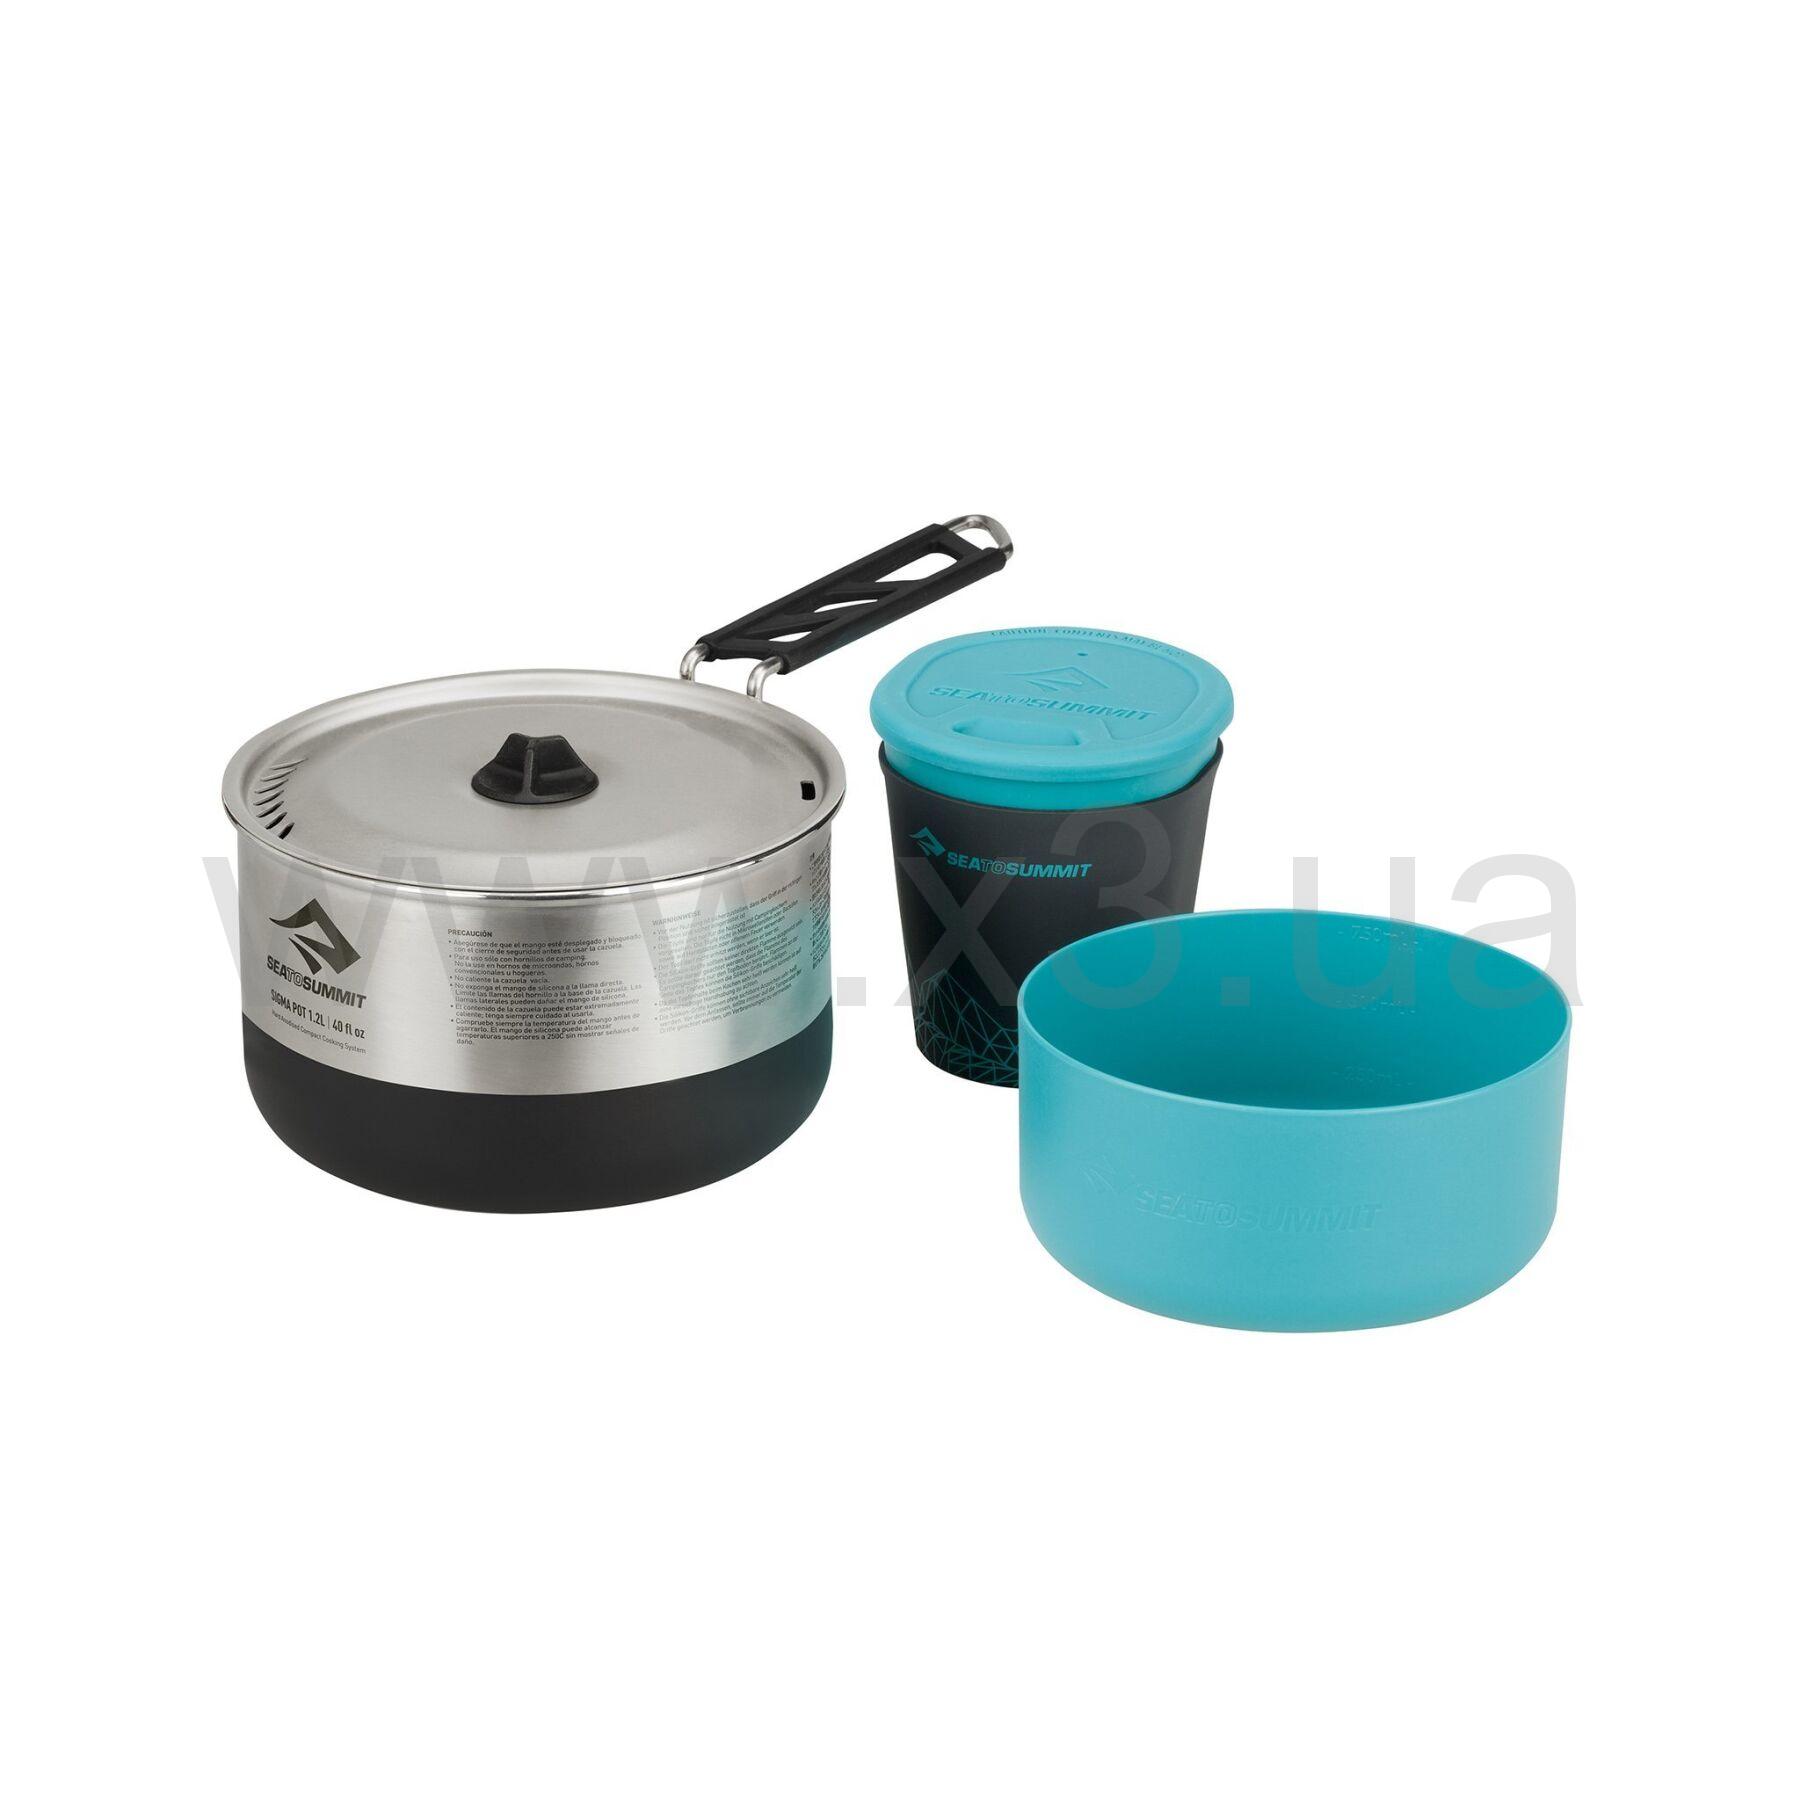 SEA TO SUMMIT Sigma Cookset 1.1 набор посуды (Pacific Blue/Silver)